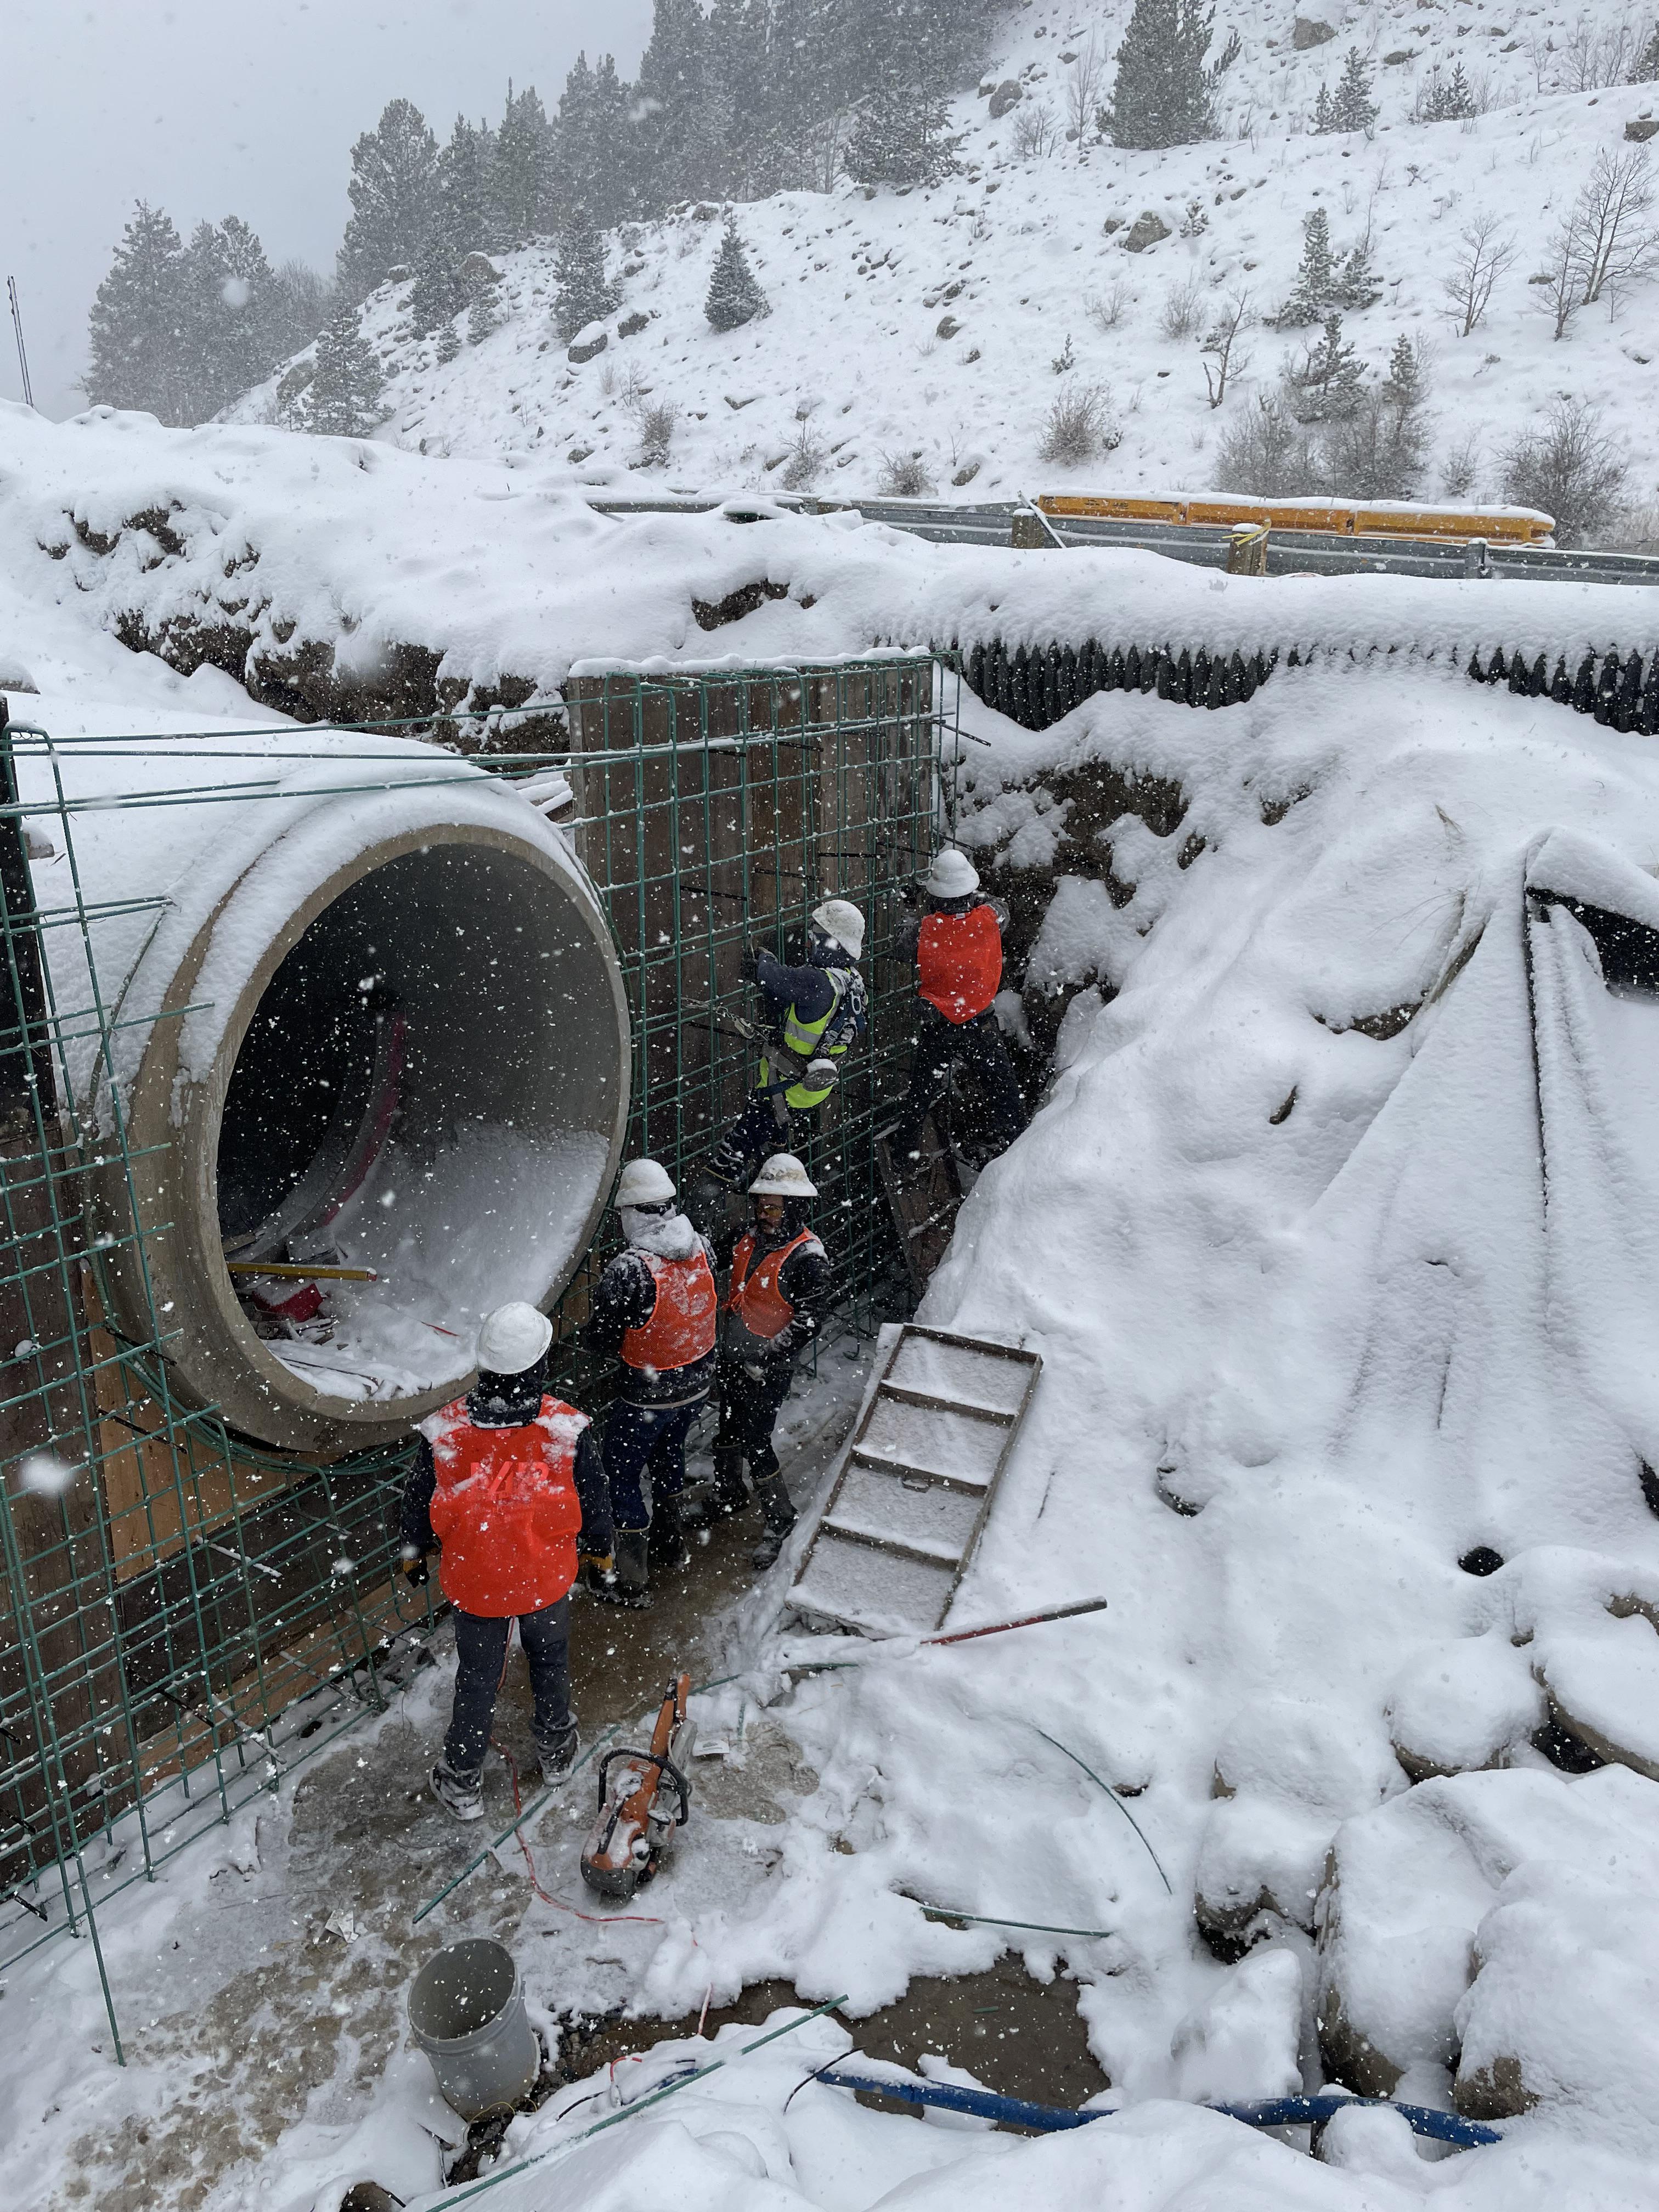 On October 27, Williams Construction crews worked through the snow and inclement weather to replace the existing metal culvert with a new concrete culvert and headwall.jpg detail image